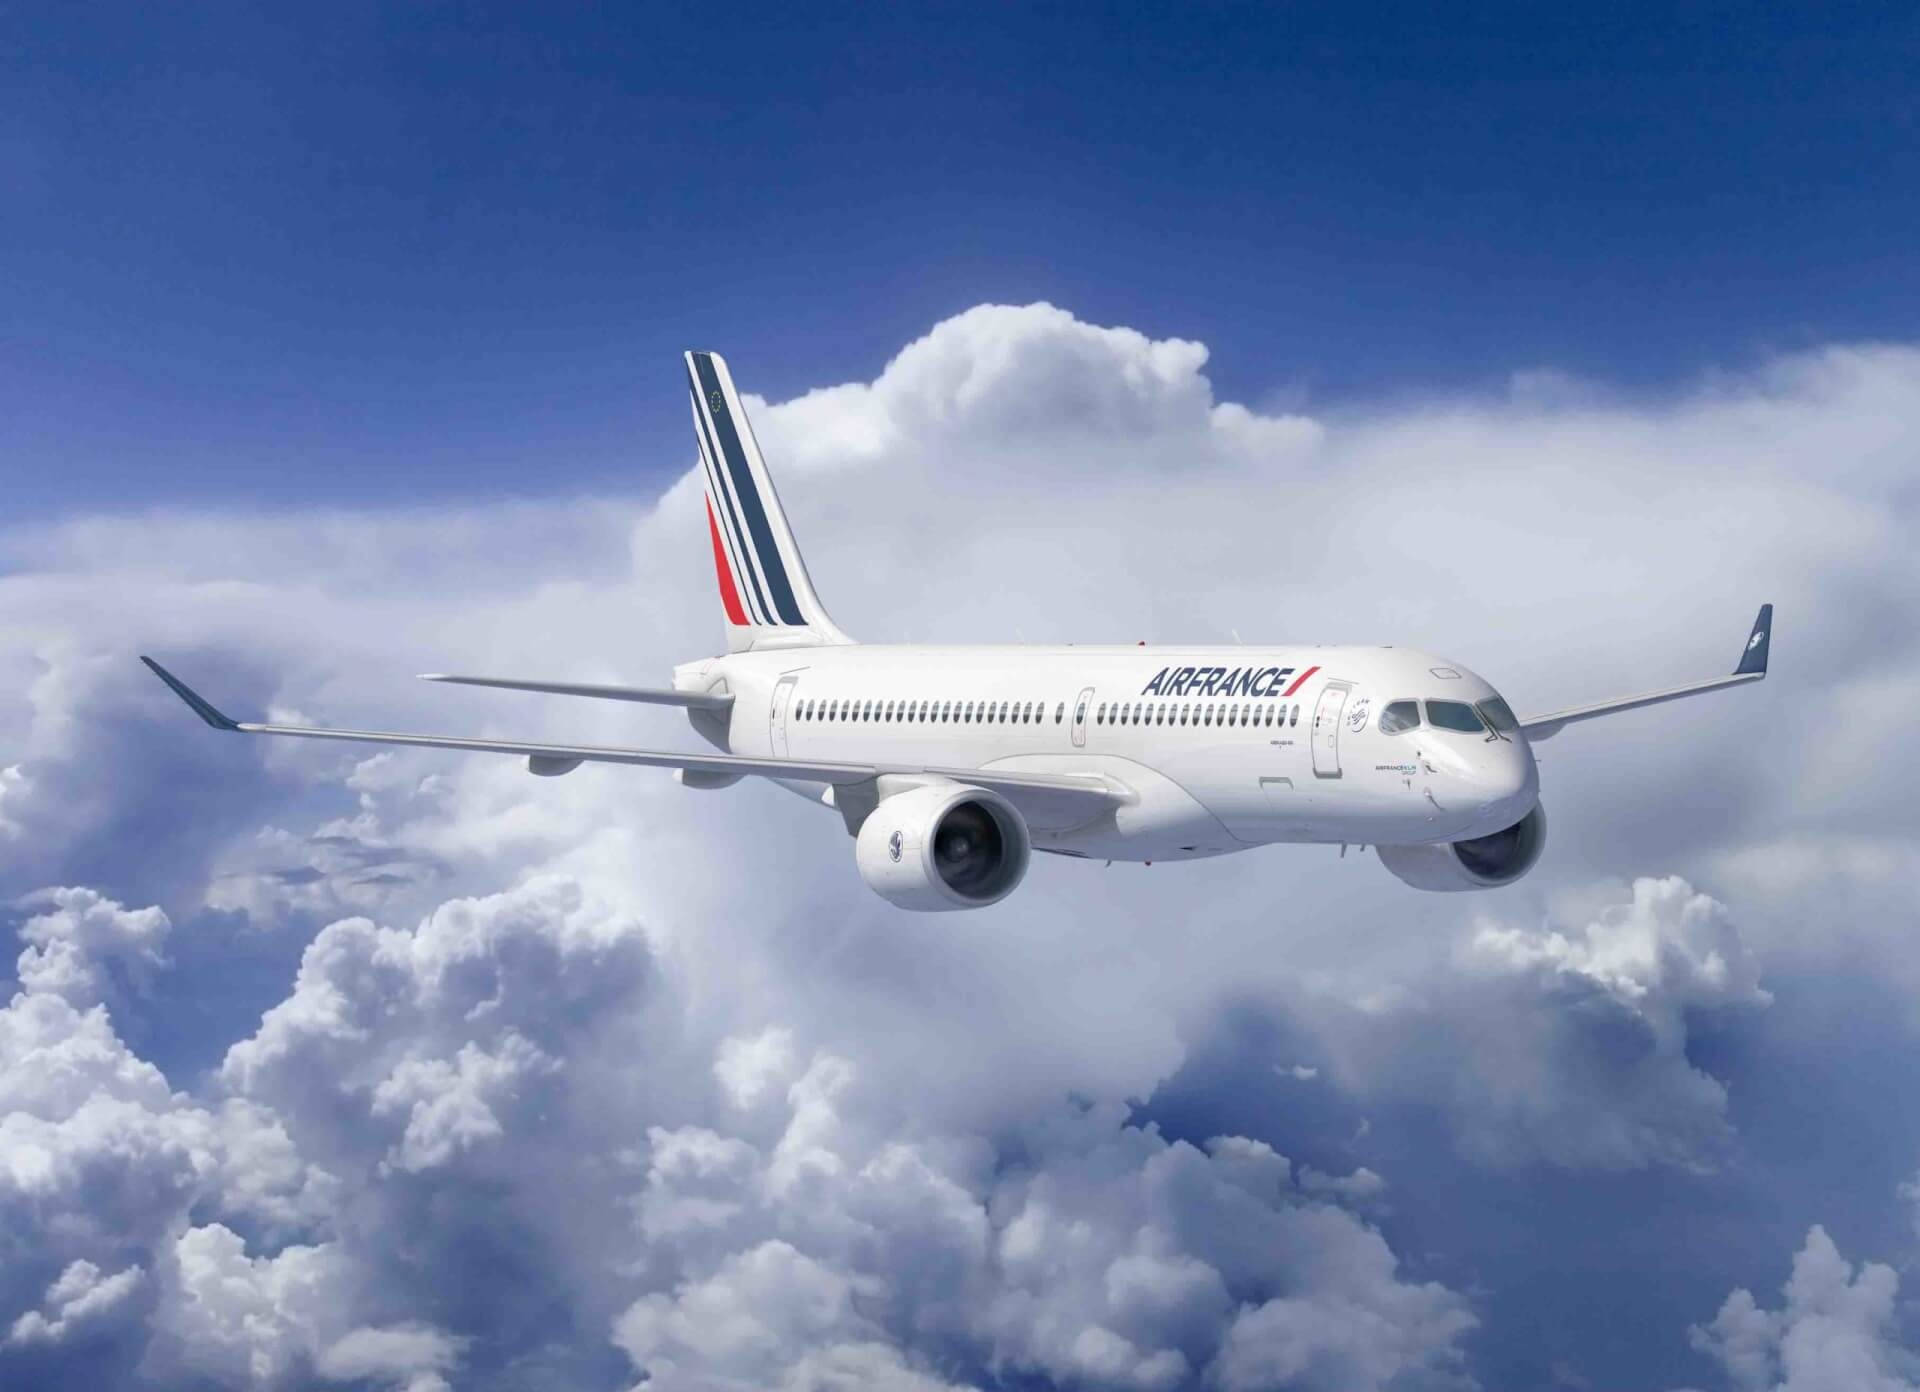 Air France Air Carrier Airbus Over The Clouds Wallpaper